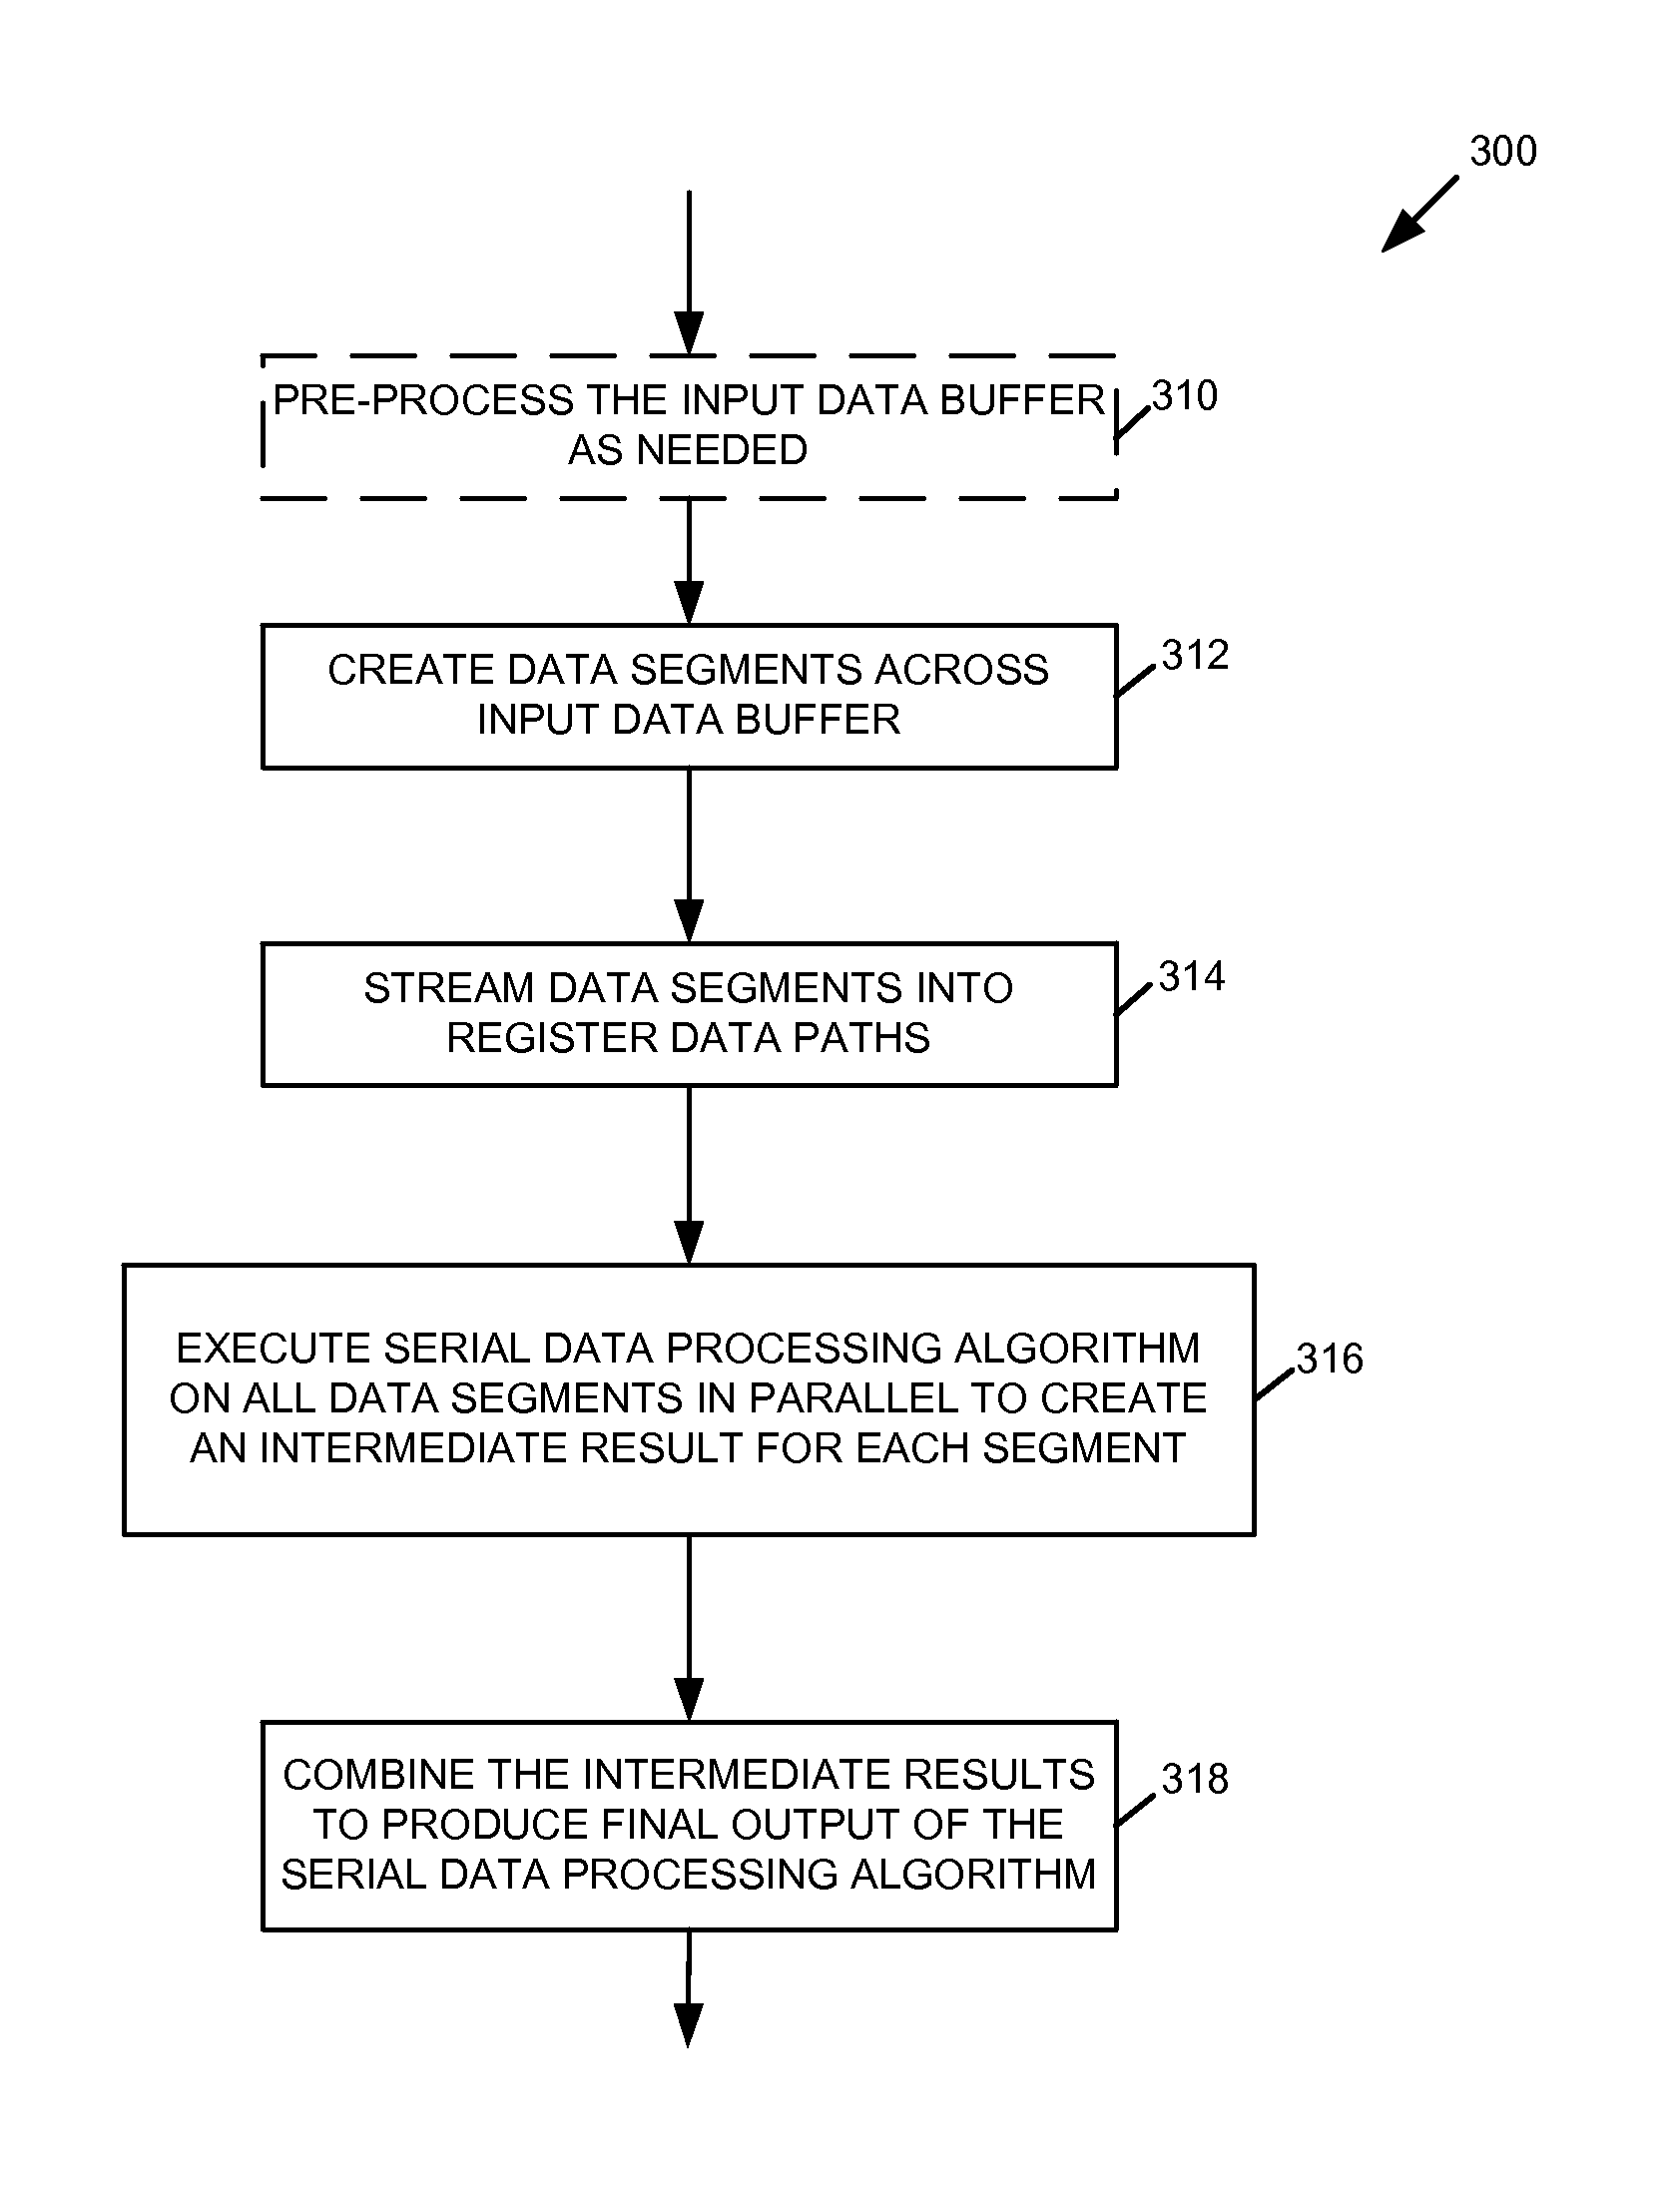 Parallel processing of a single data buffer